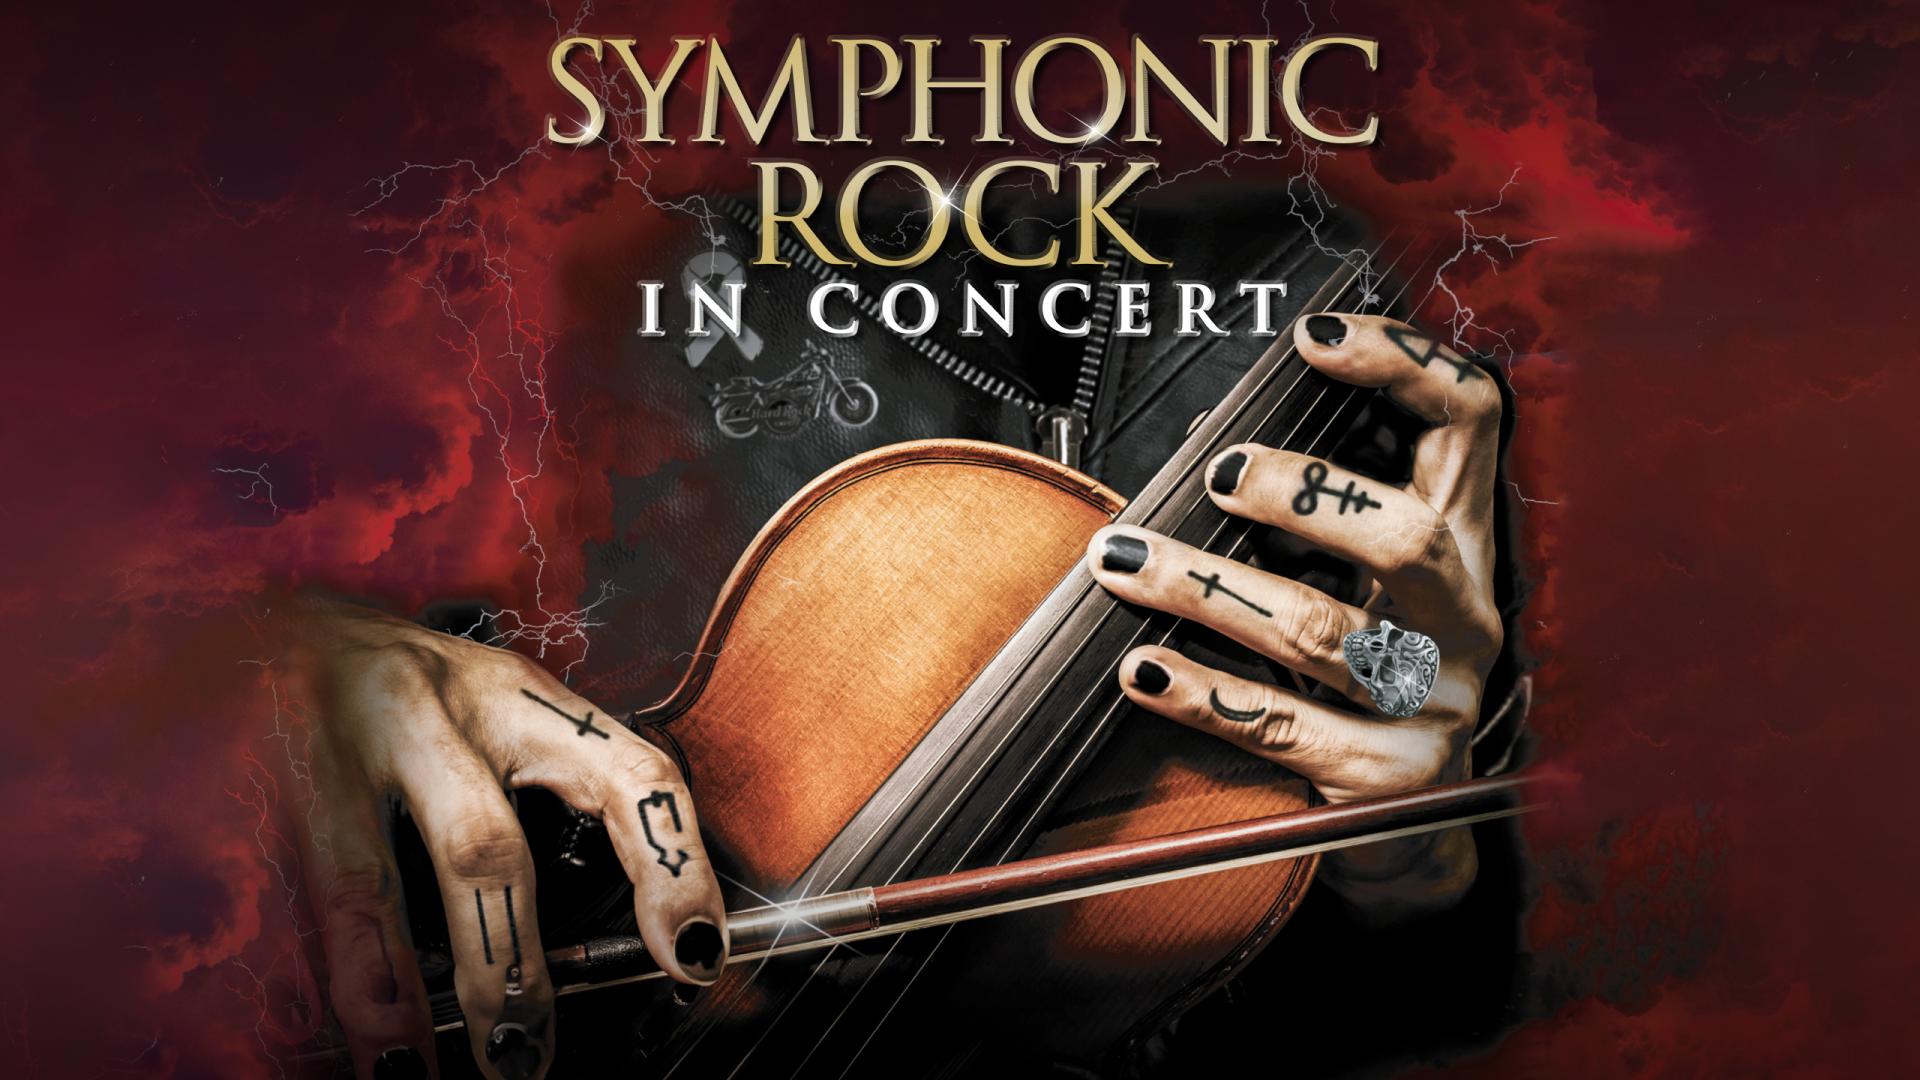 KeyArt Symphonic Rock in Concert. A hand with runic tattoos holds a violin. The background is blood red.